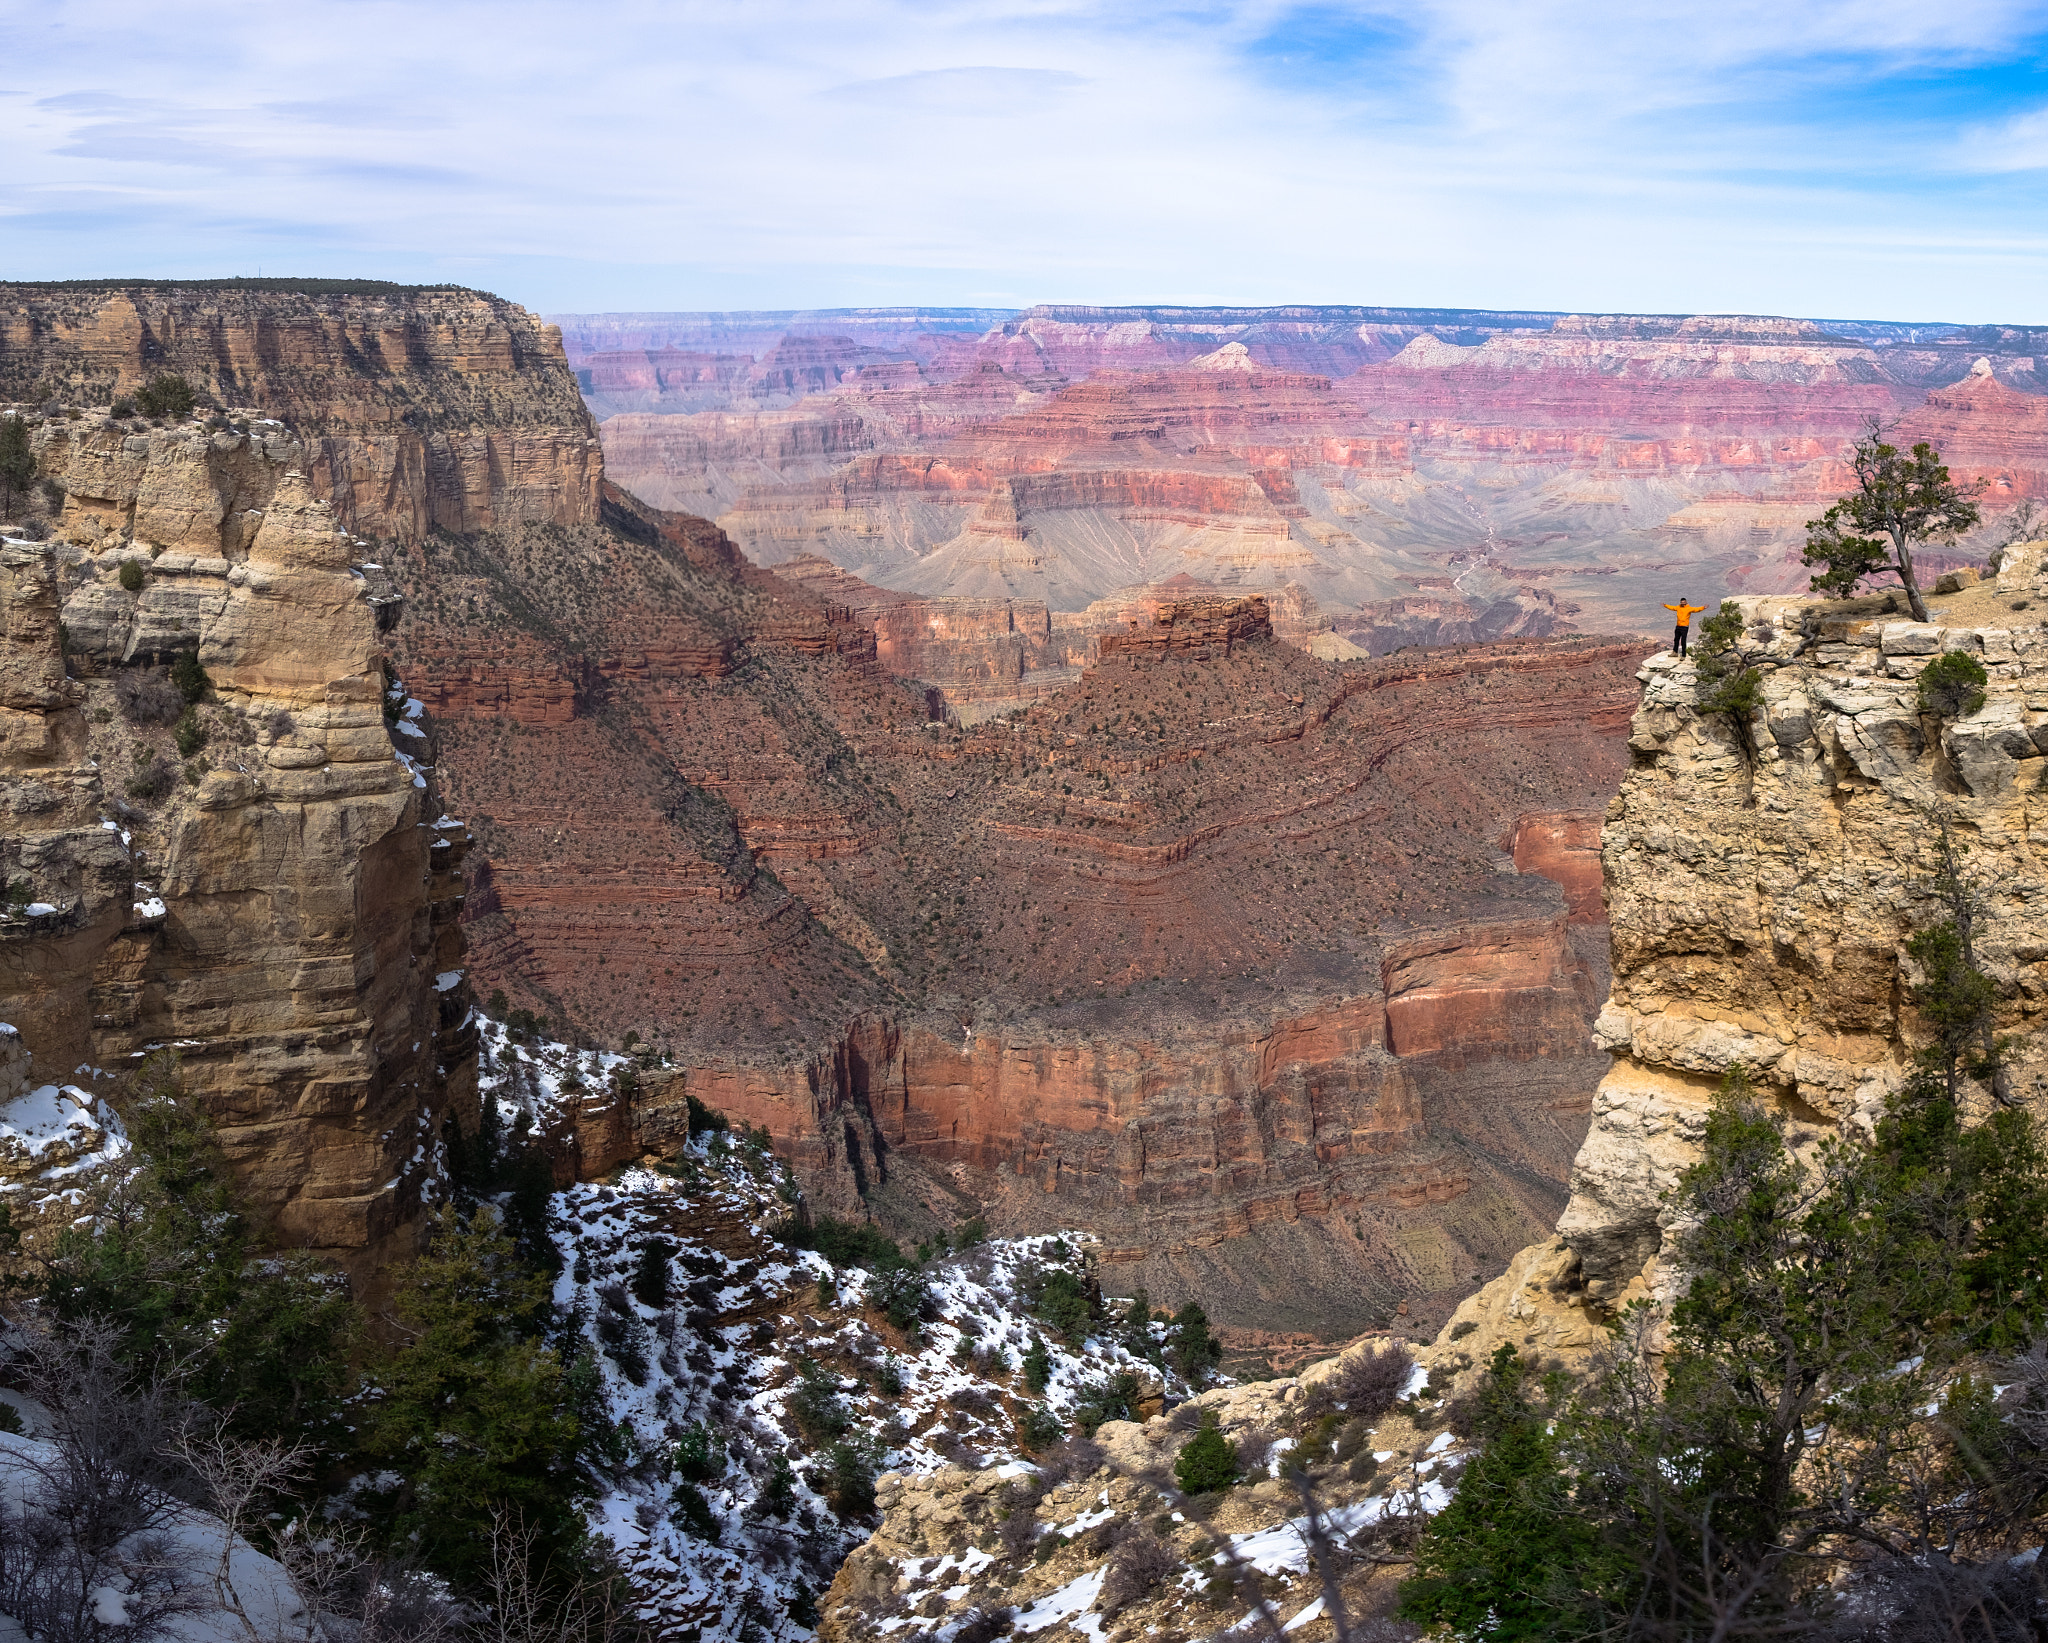 Fujifilm X-T1 + Fujifilm XF 23mm F2 R WR sample photo. Crying: acceptable at funerals and the grand canyon. photography